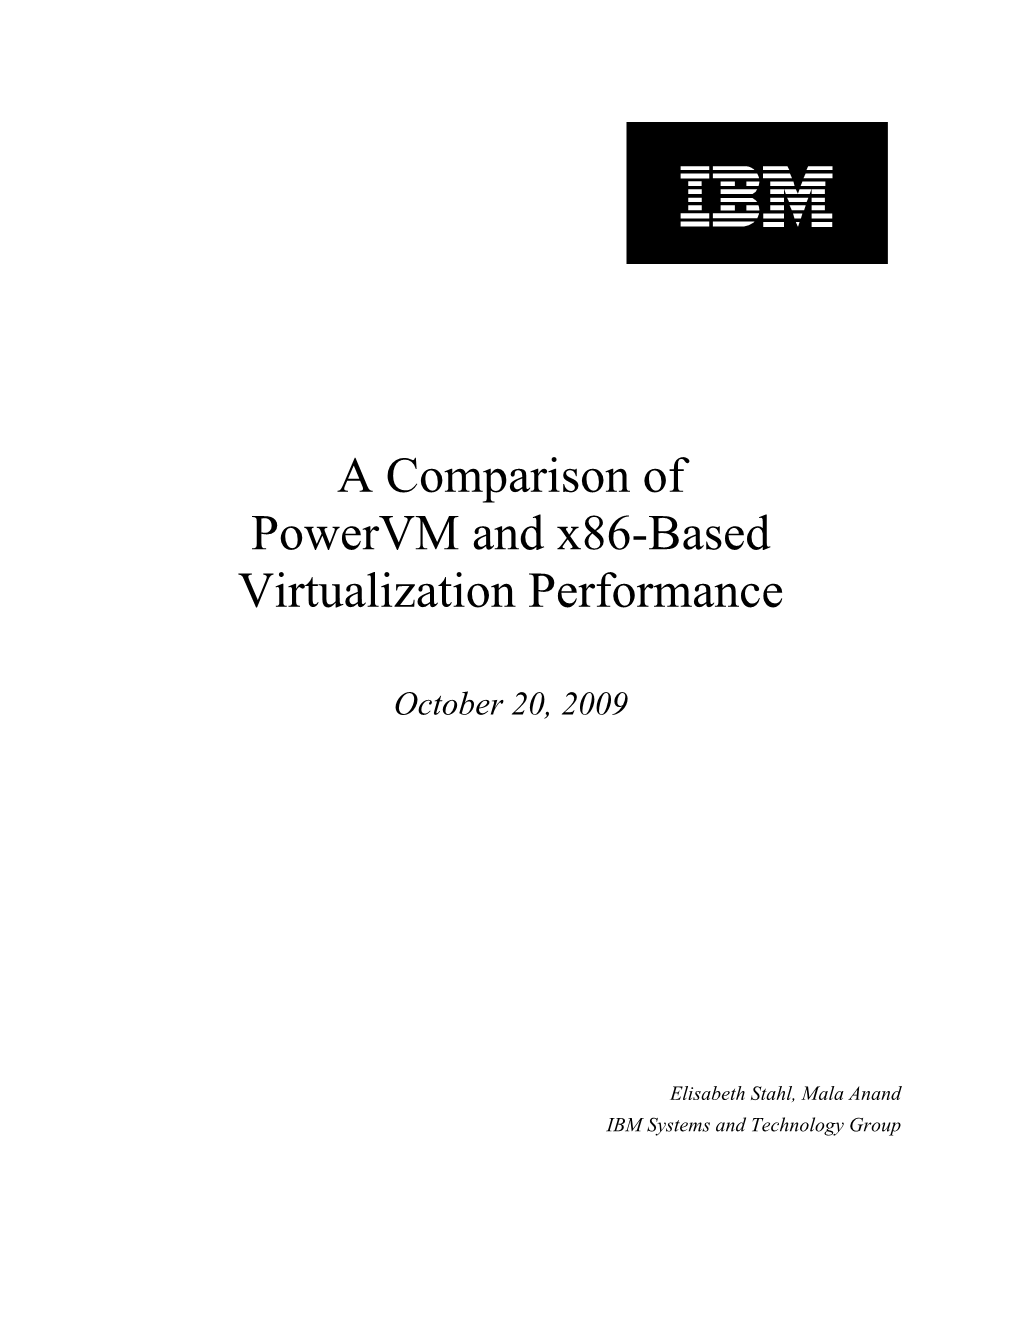 A Comparison of Powervm and X86-Based Virtualization Performance